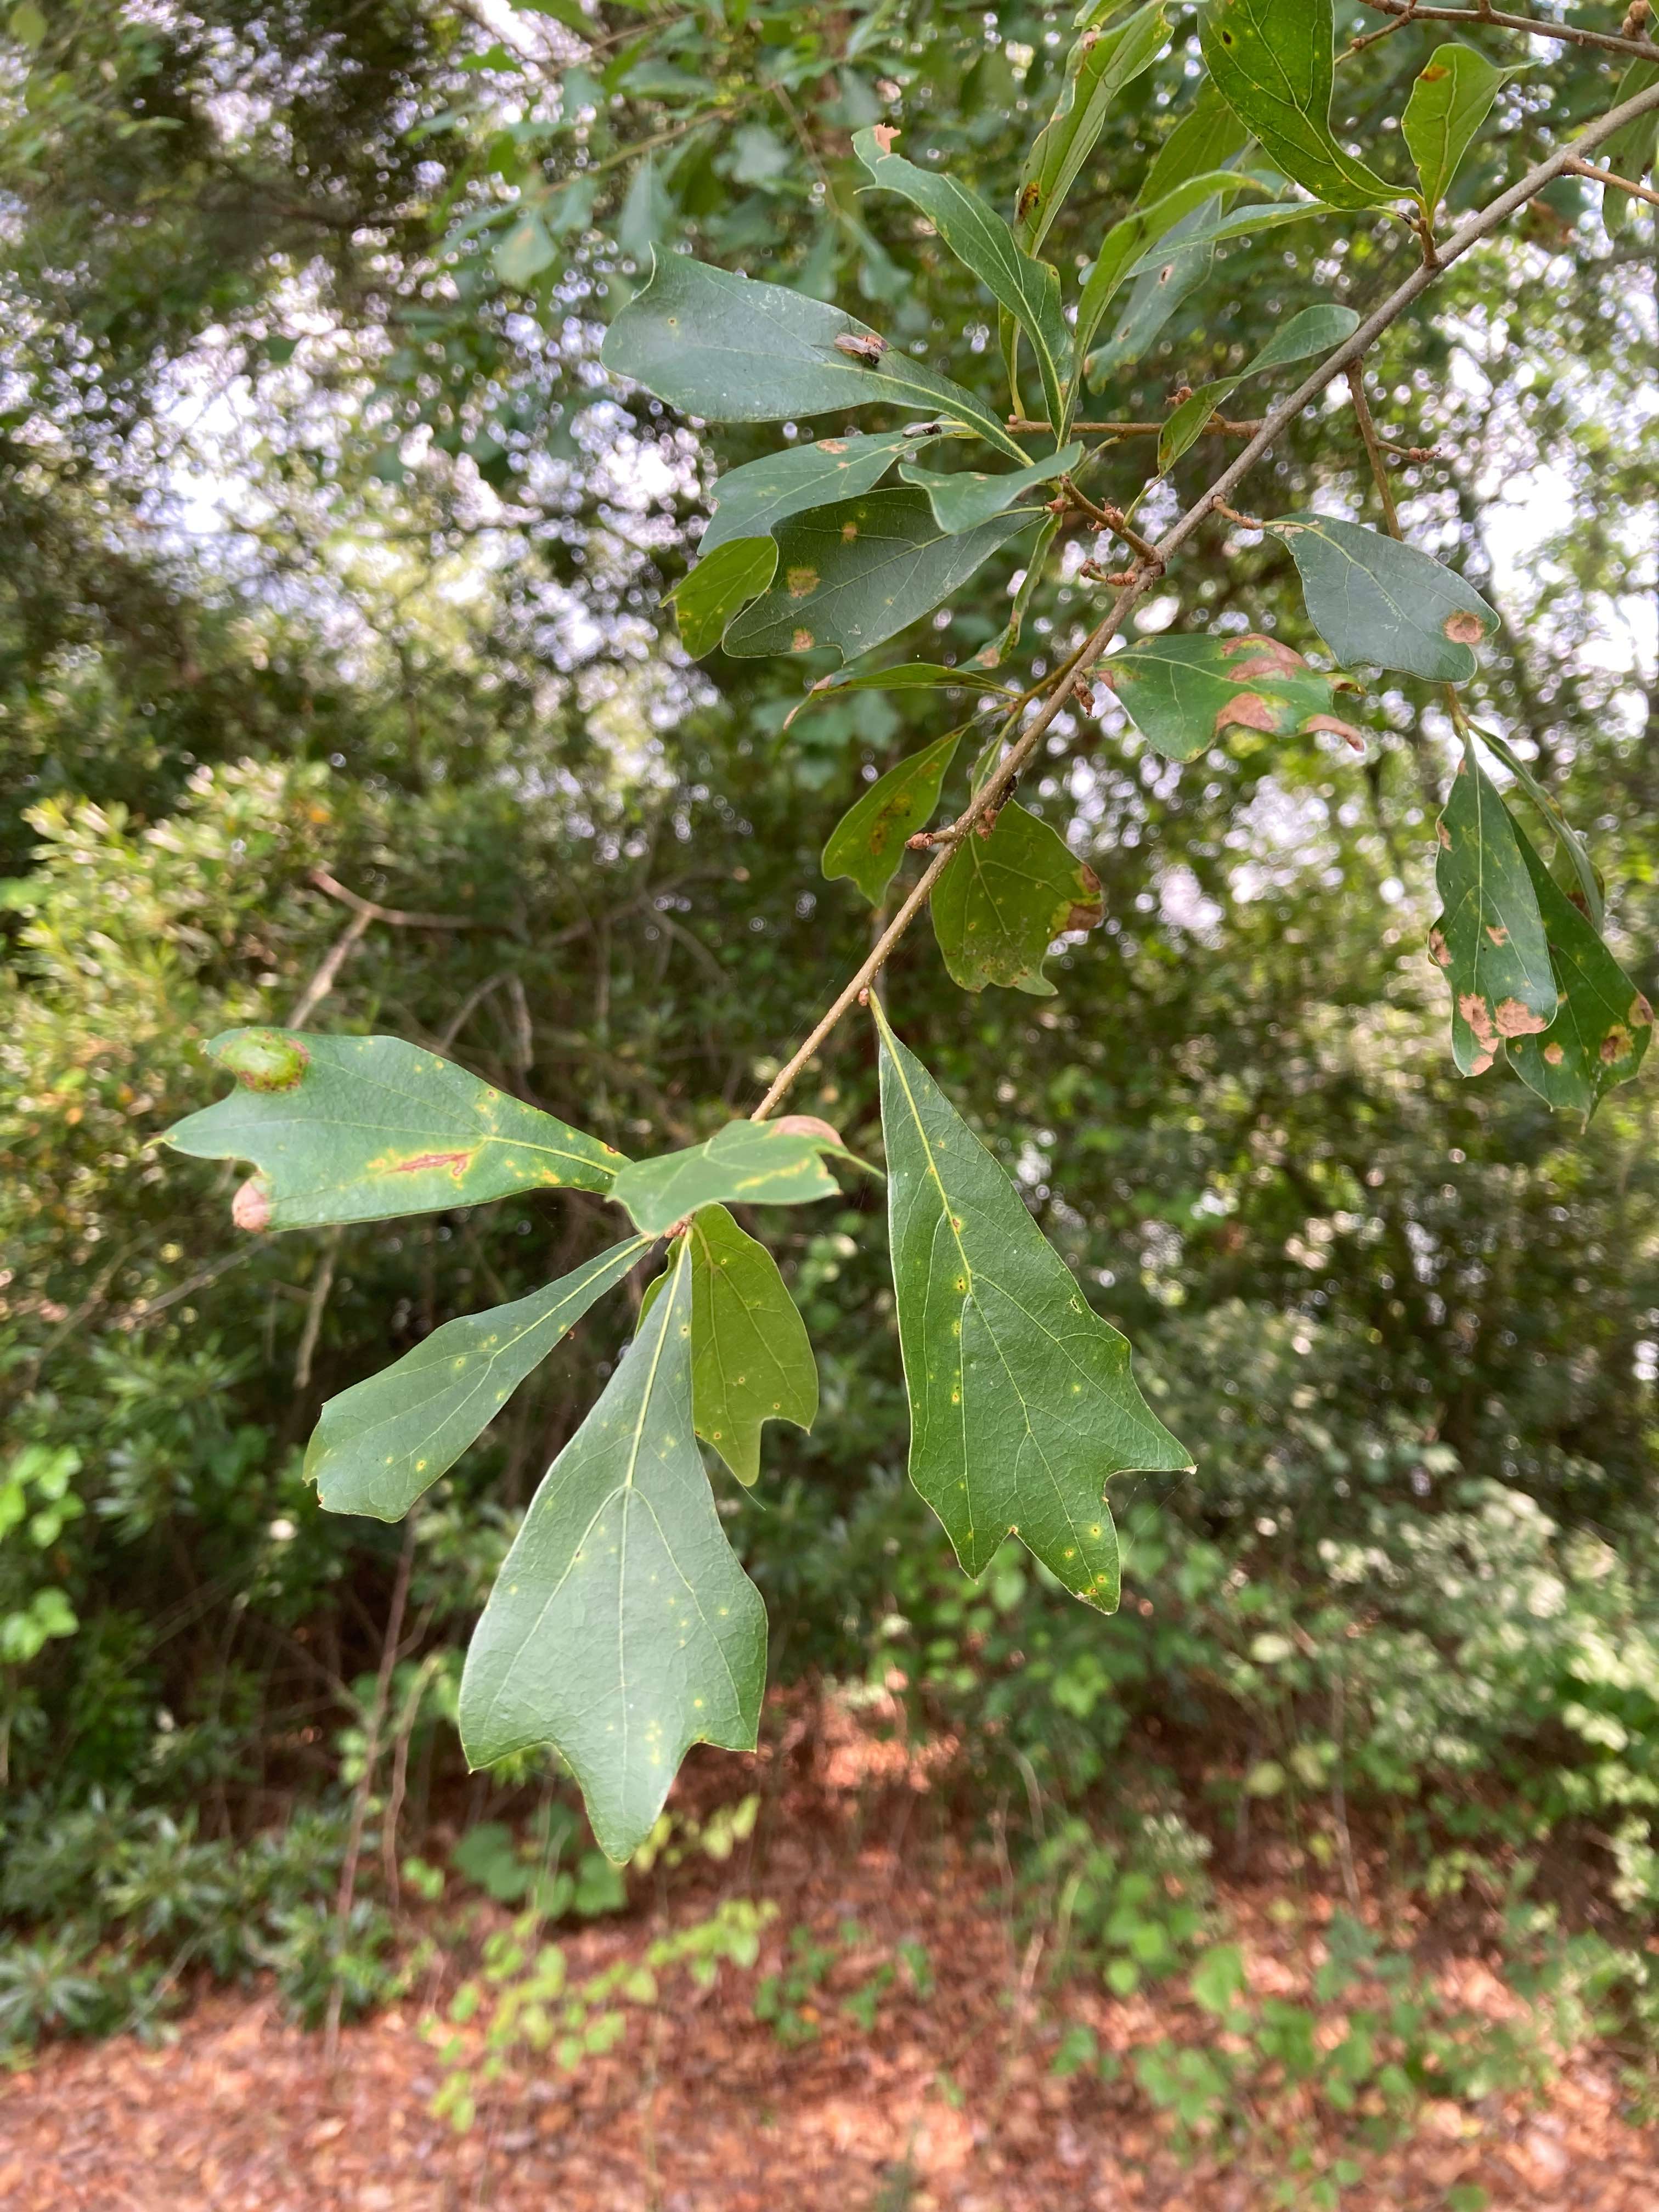 The Scientific Name is Quercus nigra. You will likely hear them called Water Oak, Paddle Oak. This picture shows the Some leaves have three rounded lobes. The bristle tips can easily be seen on them. of Quercus nigra